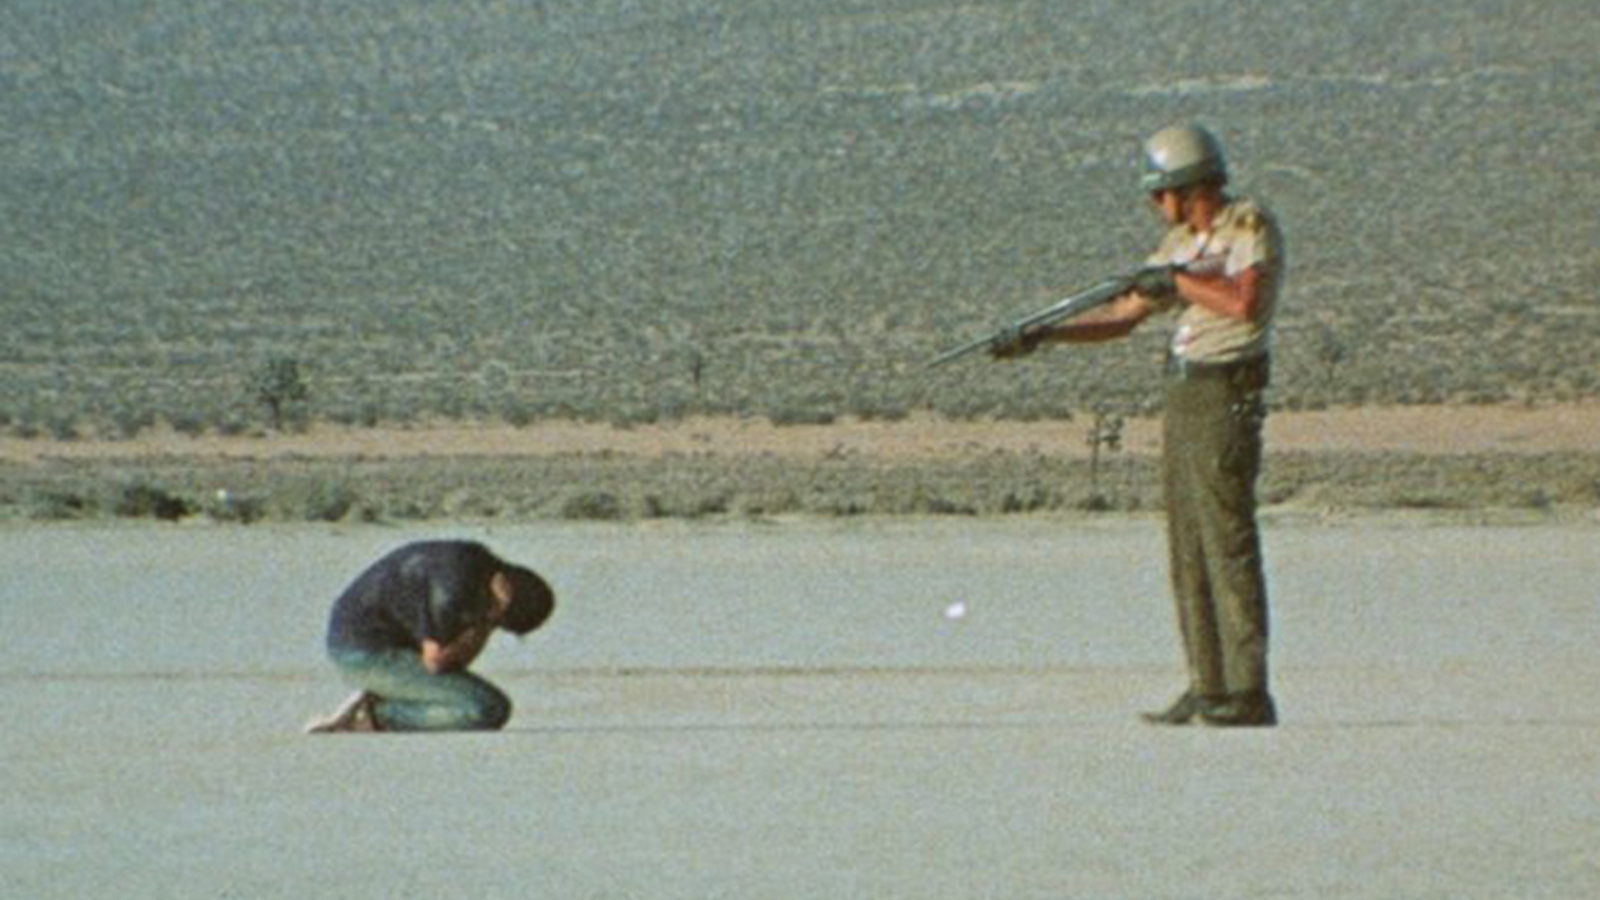 In a vast desert landscape, a policeman aims a rifle at a man cowering before him.